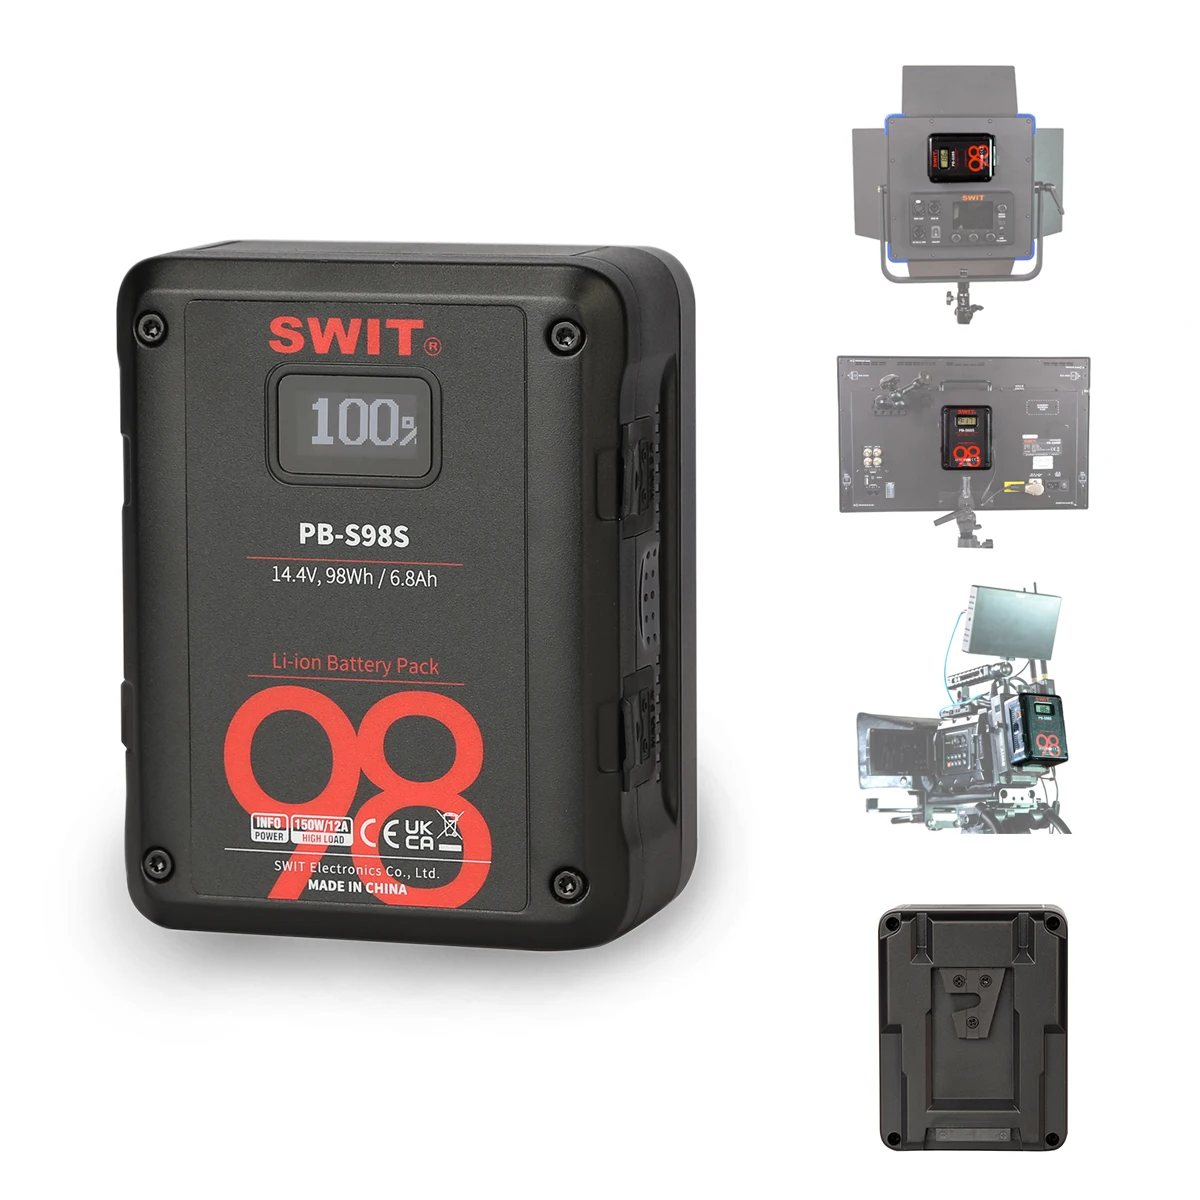 SWIT PB-S98S 98Wh Multi-sockets Square V Mount Digital Battery For Cine-cameras, Max 150W, 12A Load, 2× D-tap Output Sockets